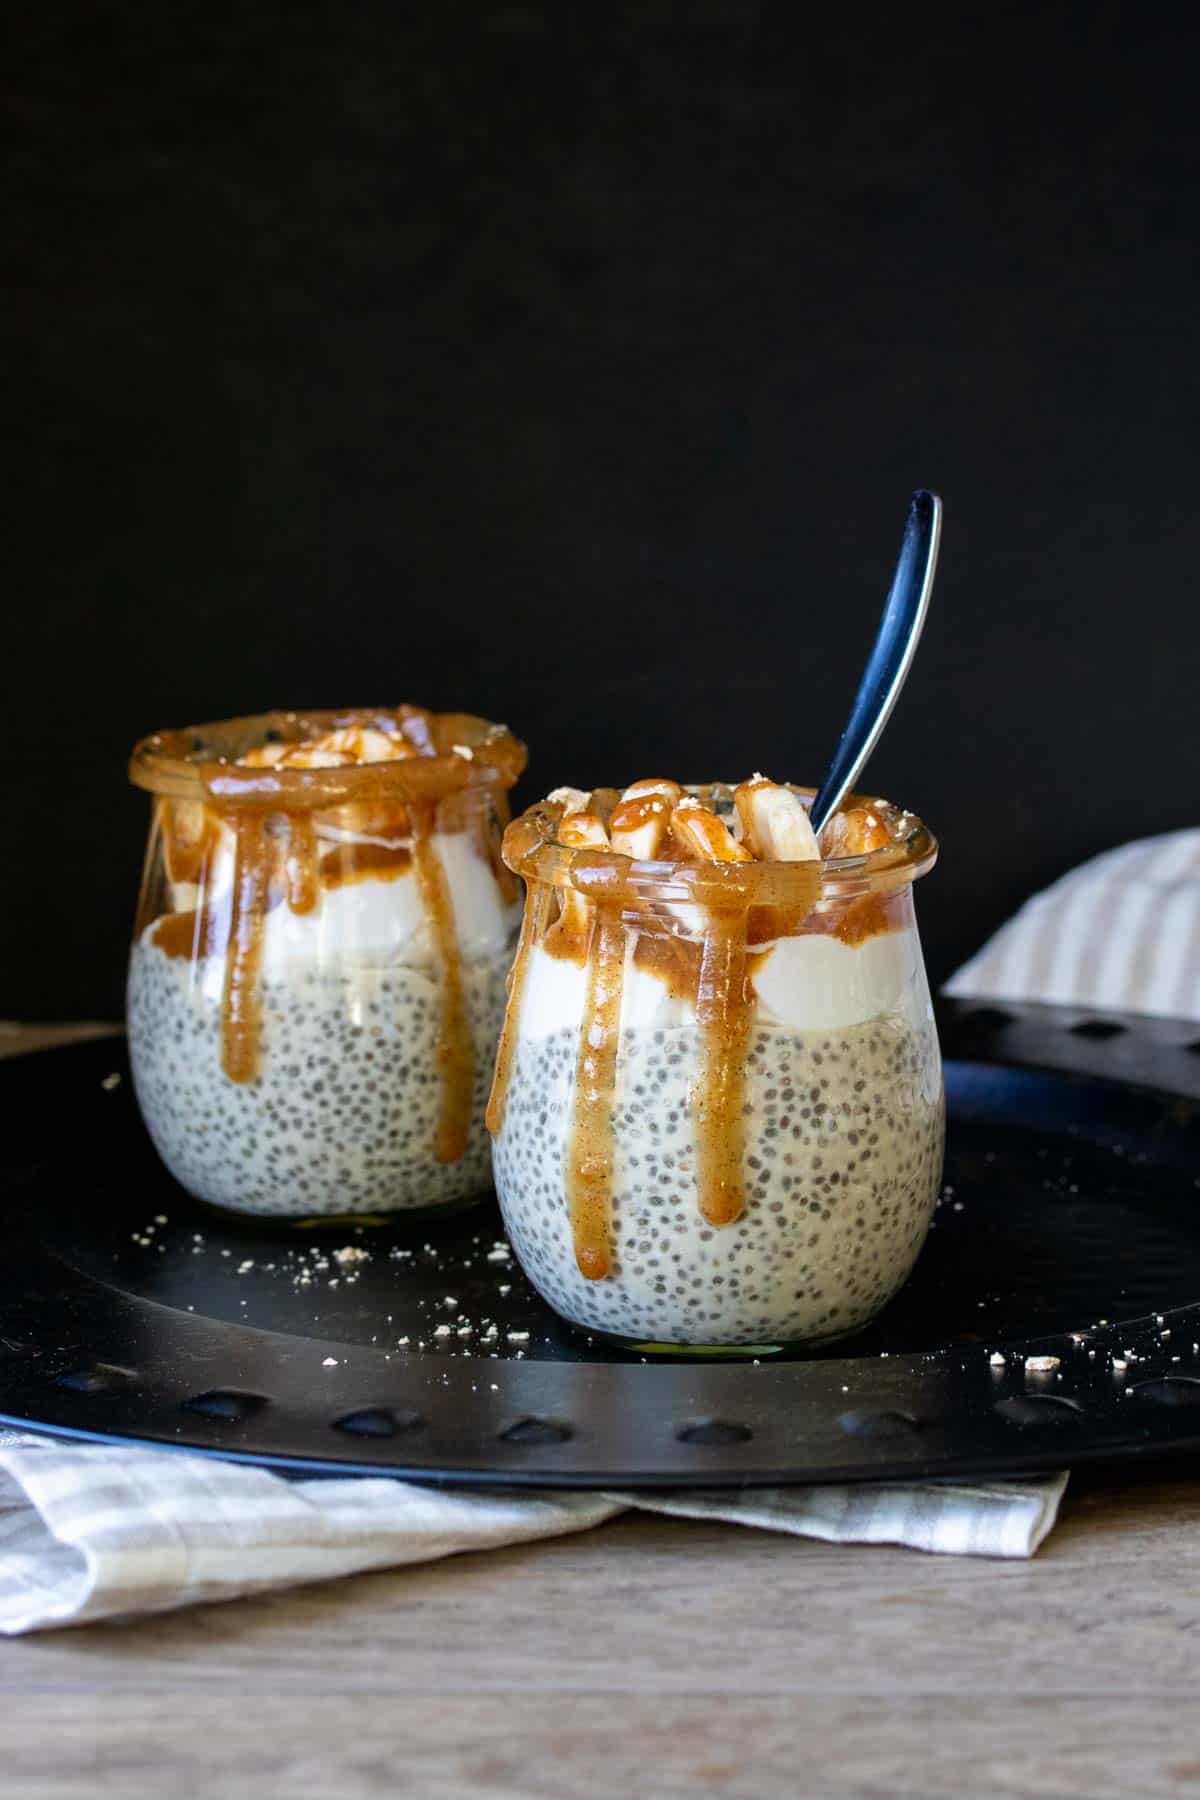 Chia pudding with whipped cream, bananas and caramel in two glass jars on a black plate